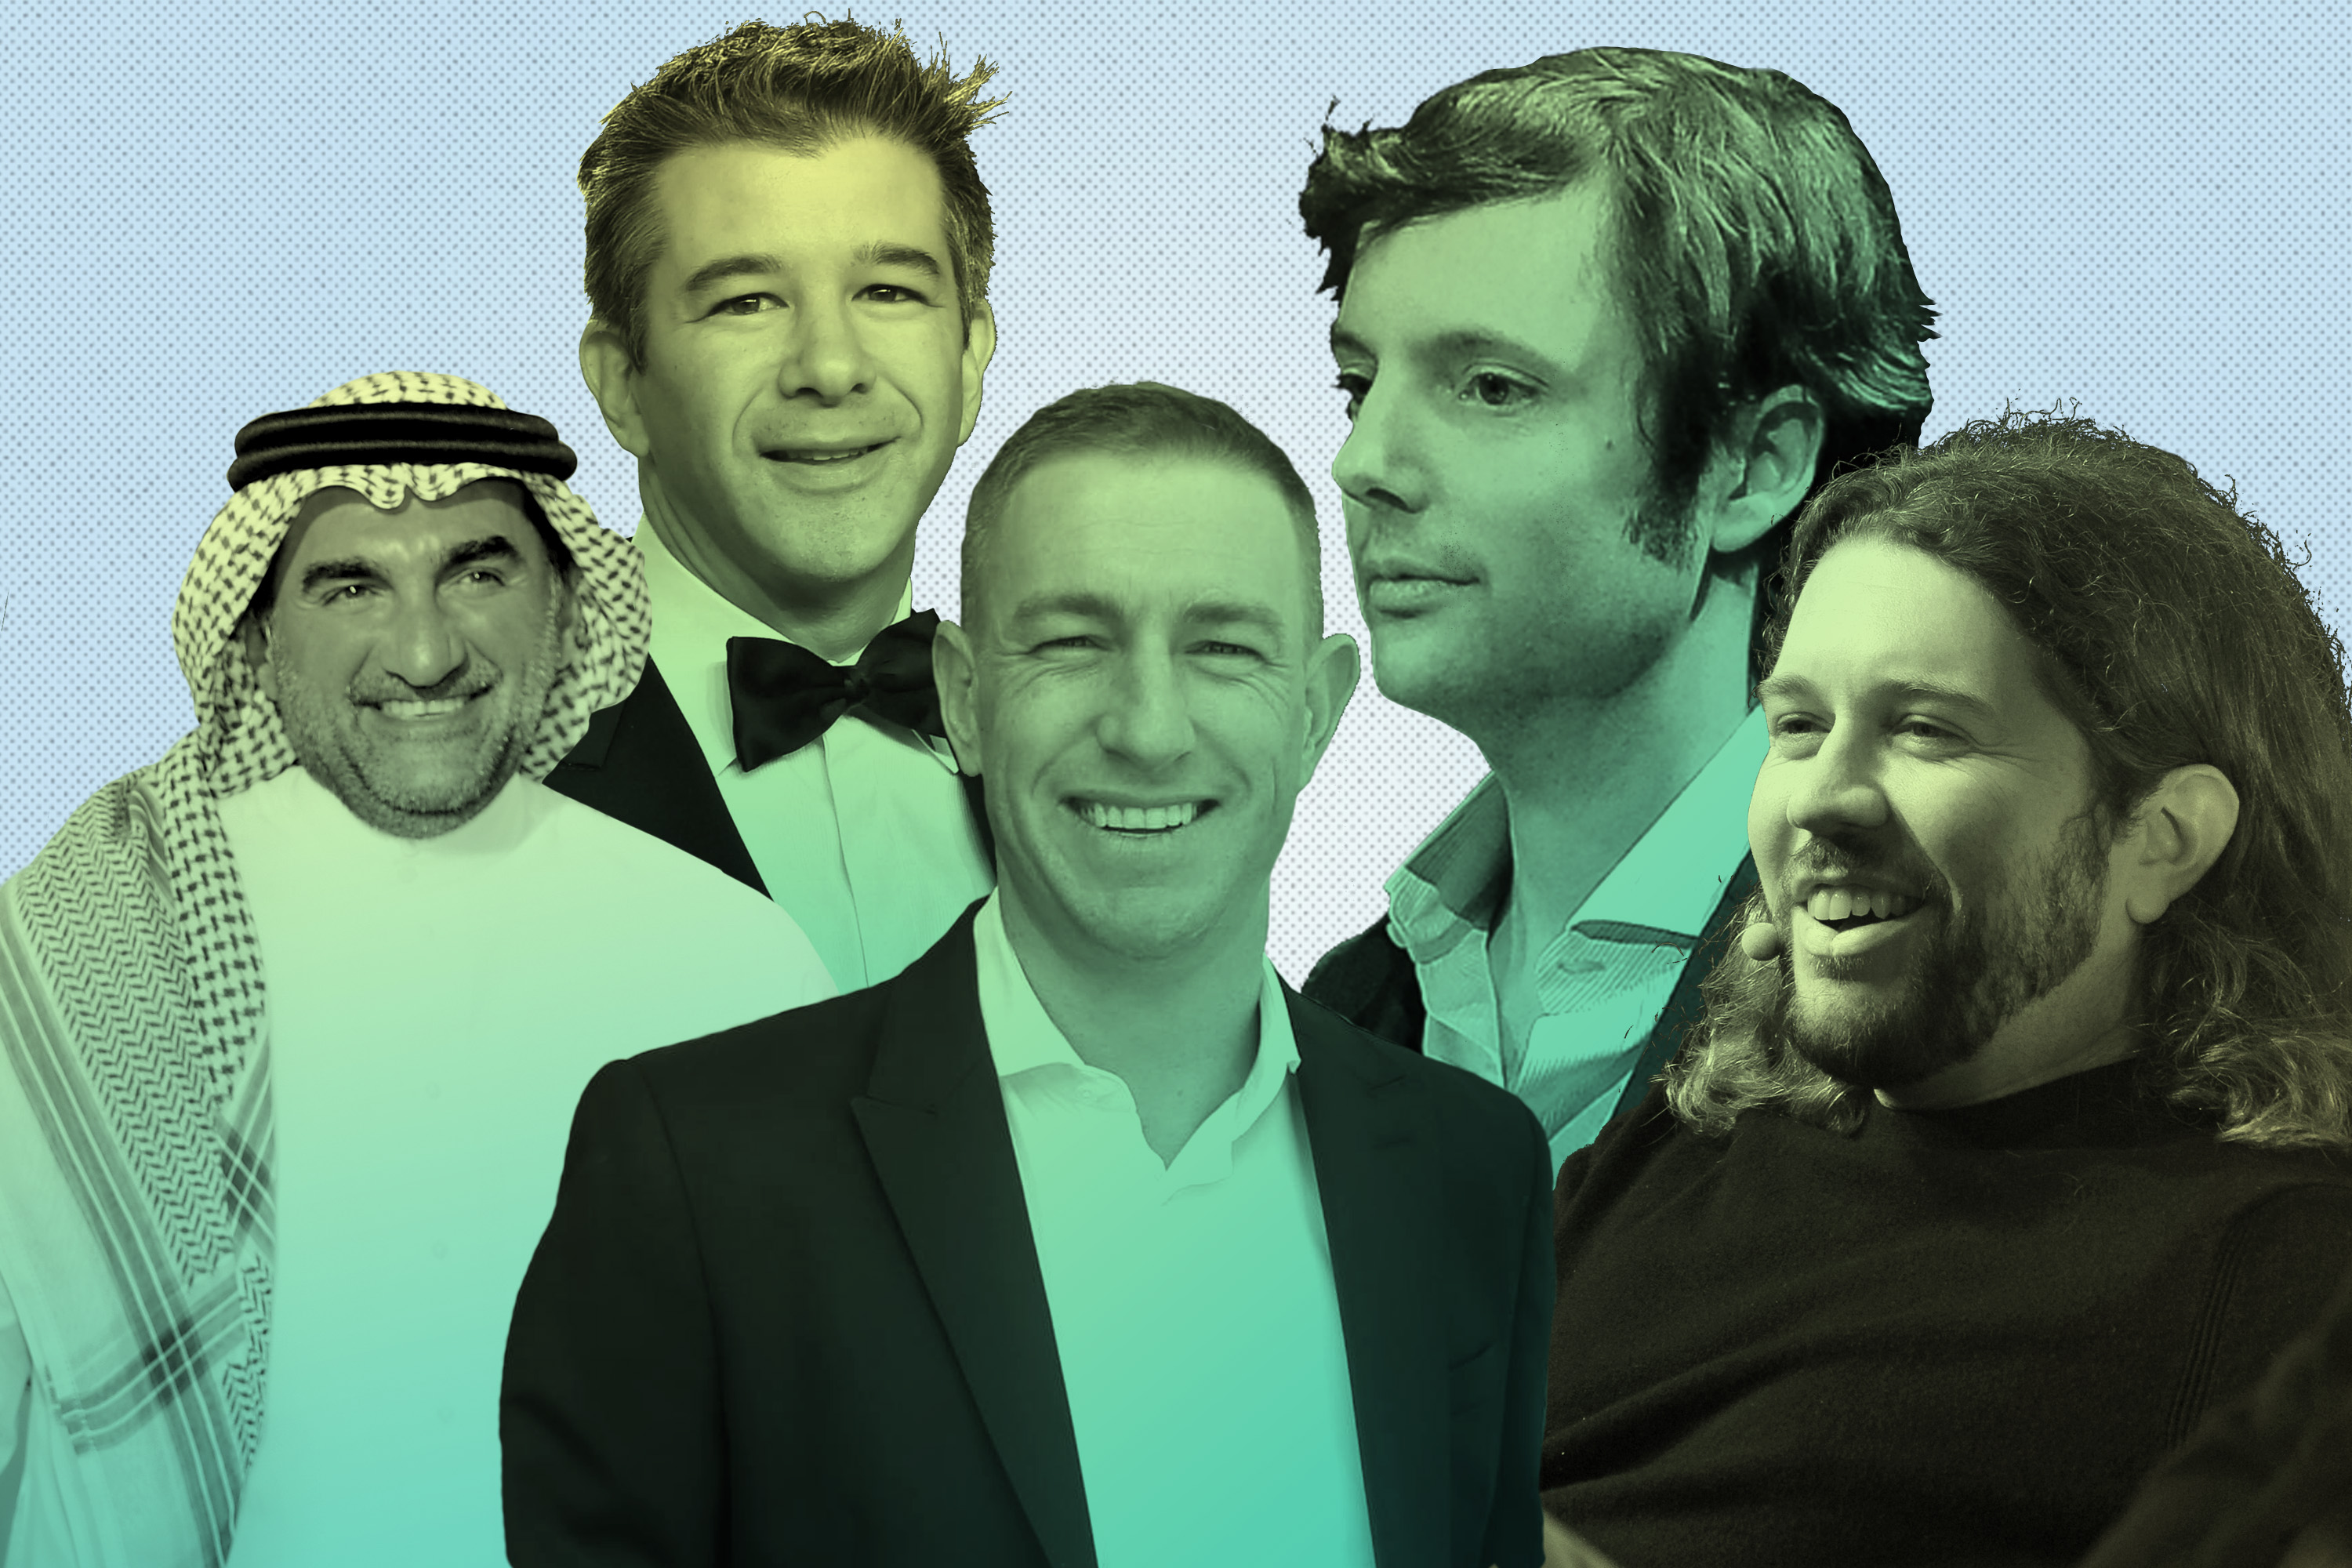 Uber Could Be Worth $100 Billion After Its IPO. Here's Who Stands to Make the Most Money